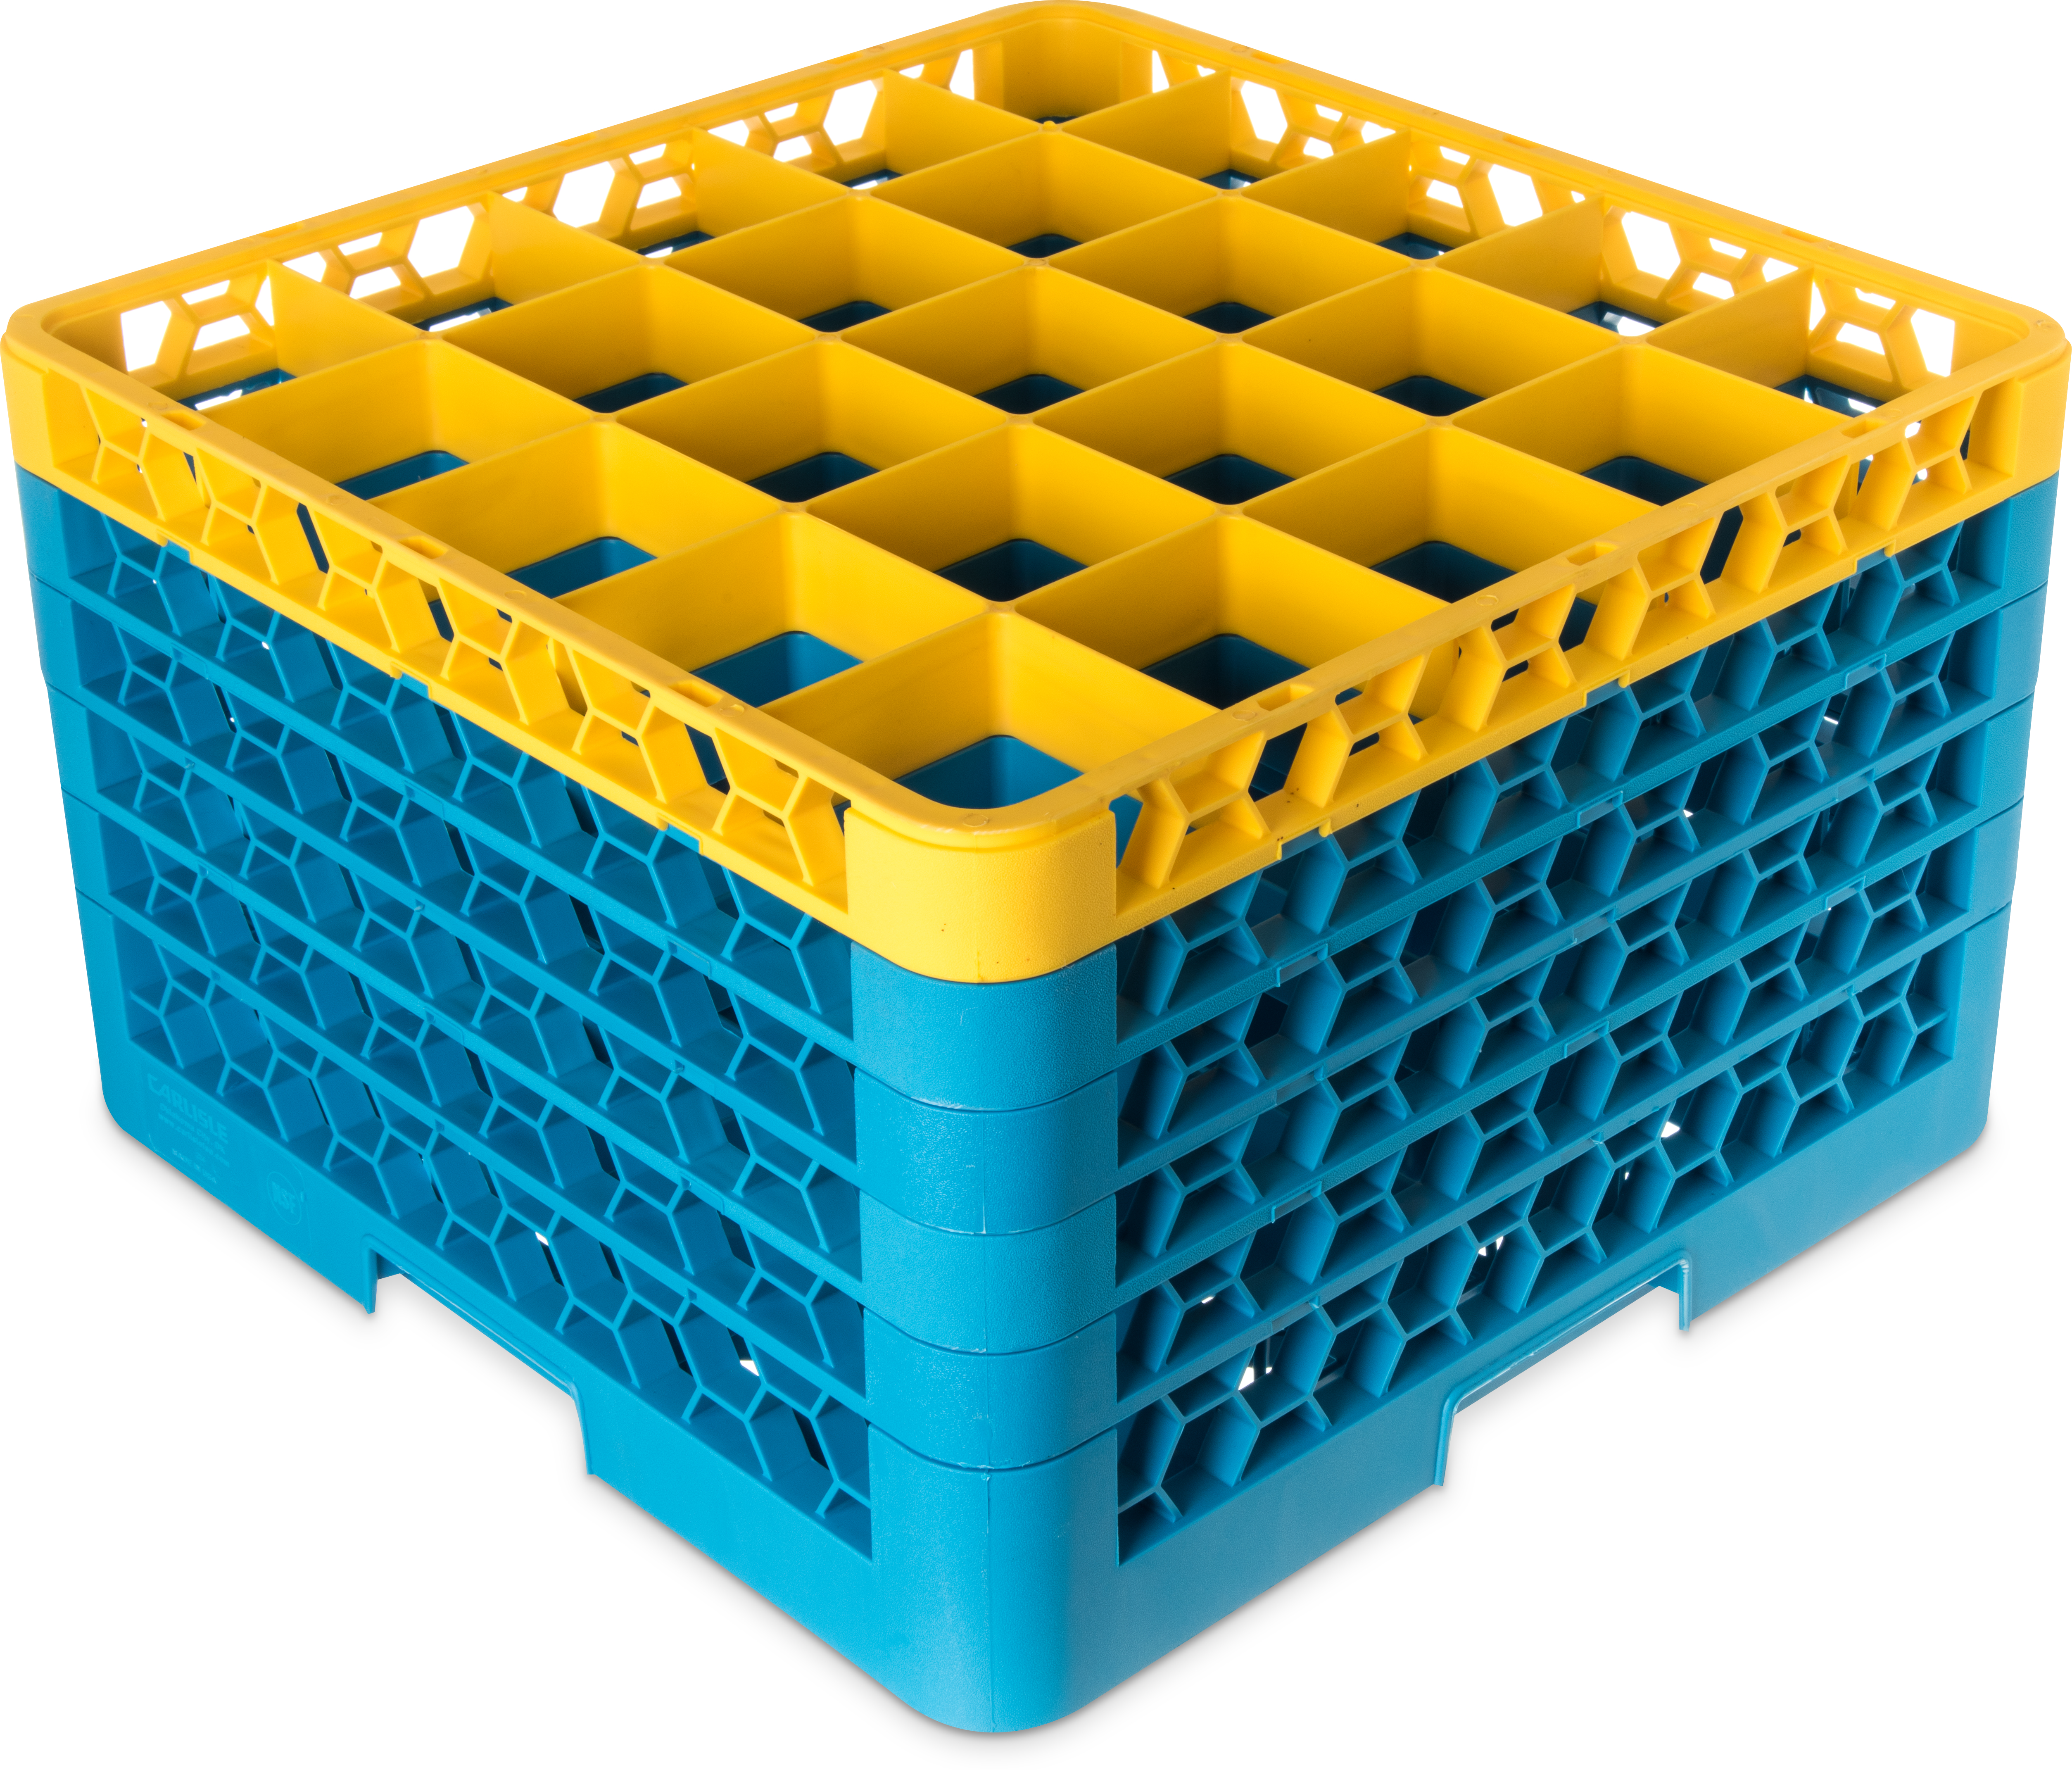 OptiClean 25 Compartment Glass Rack with 5 Extenders 11.9 - Yellow-Carlisle Blue